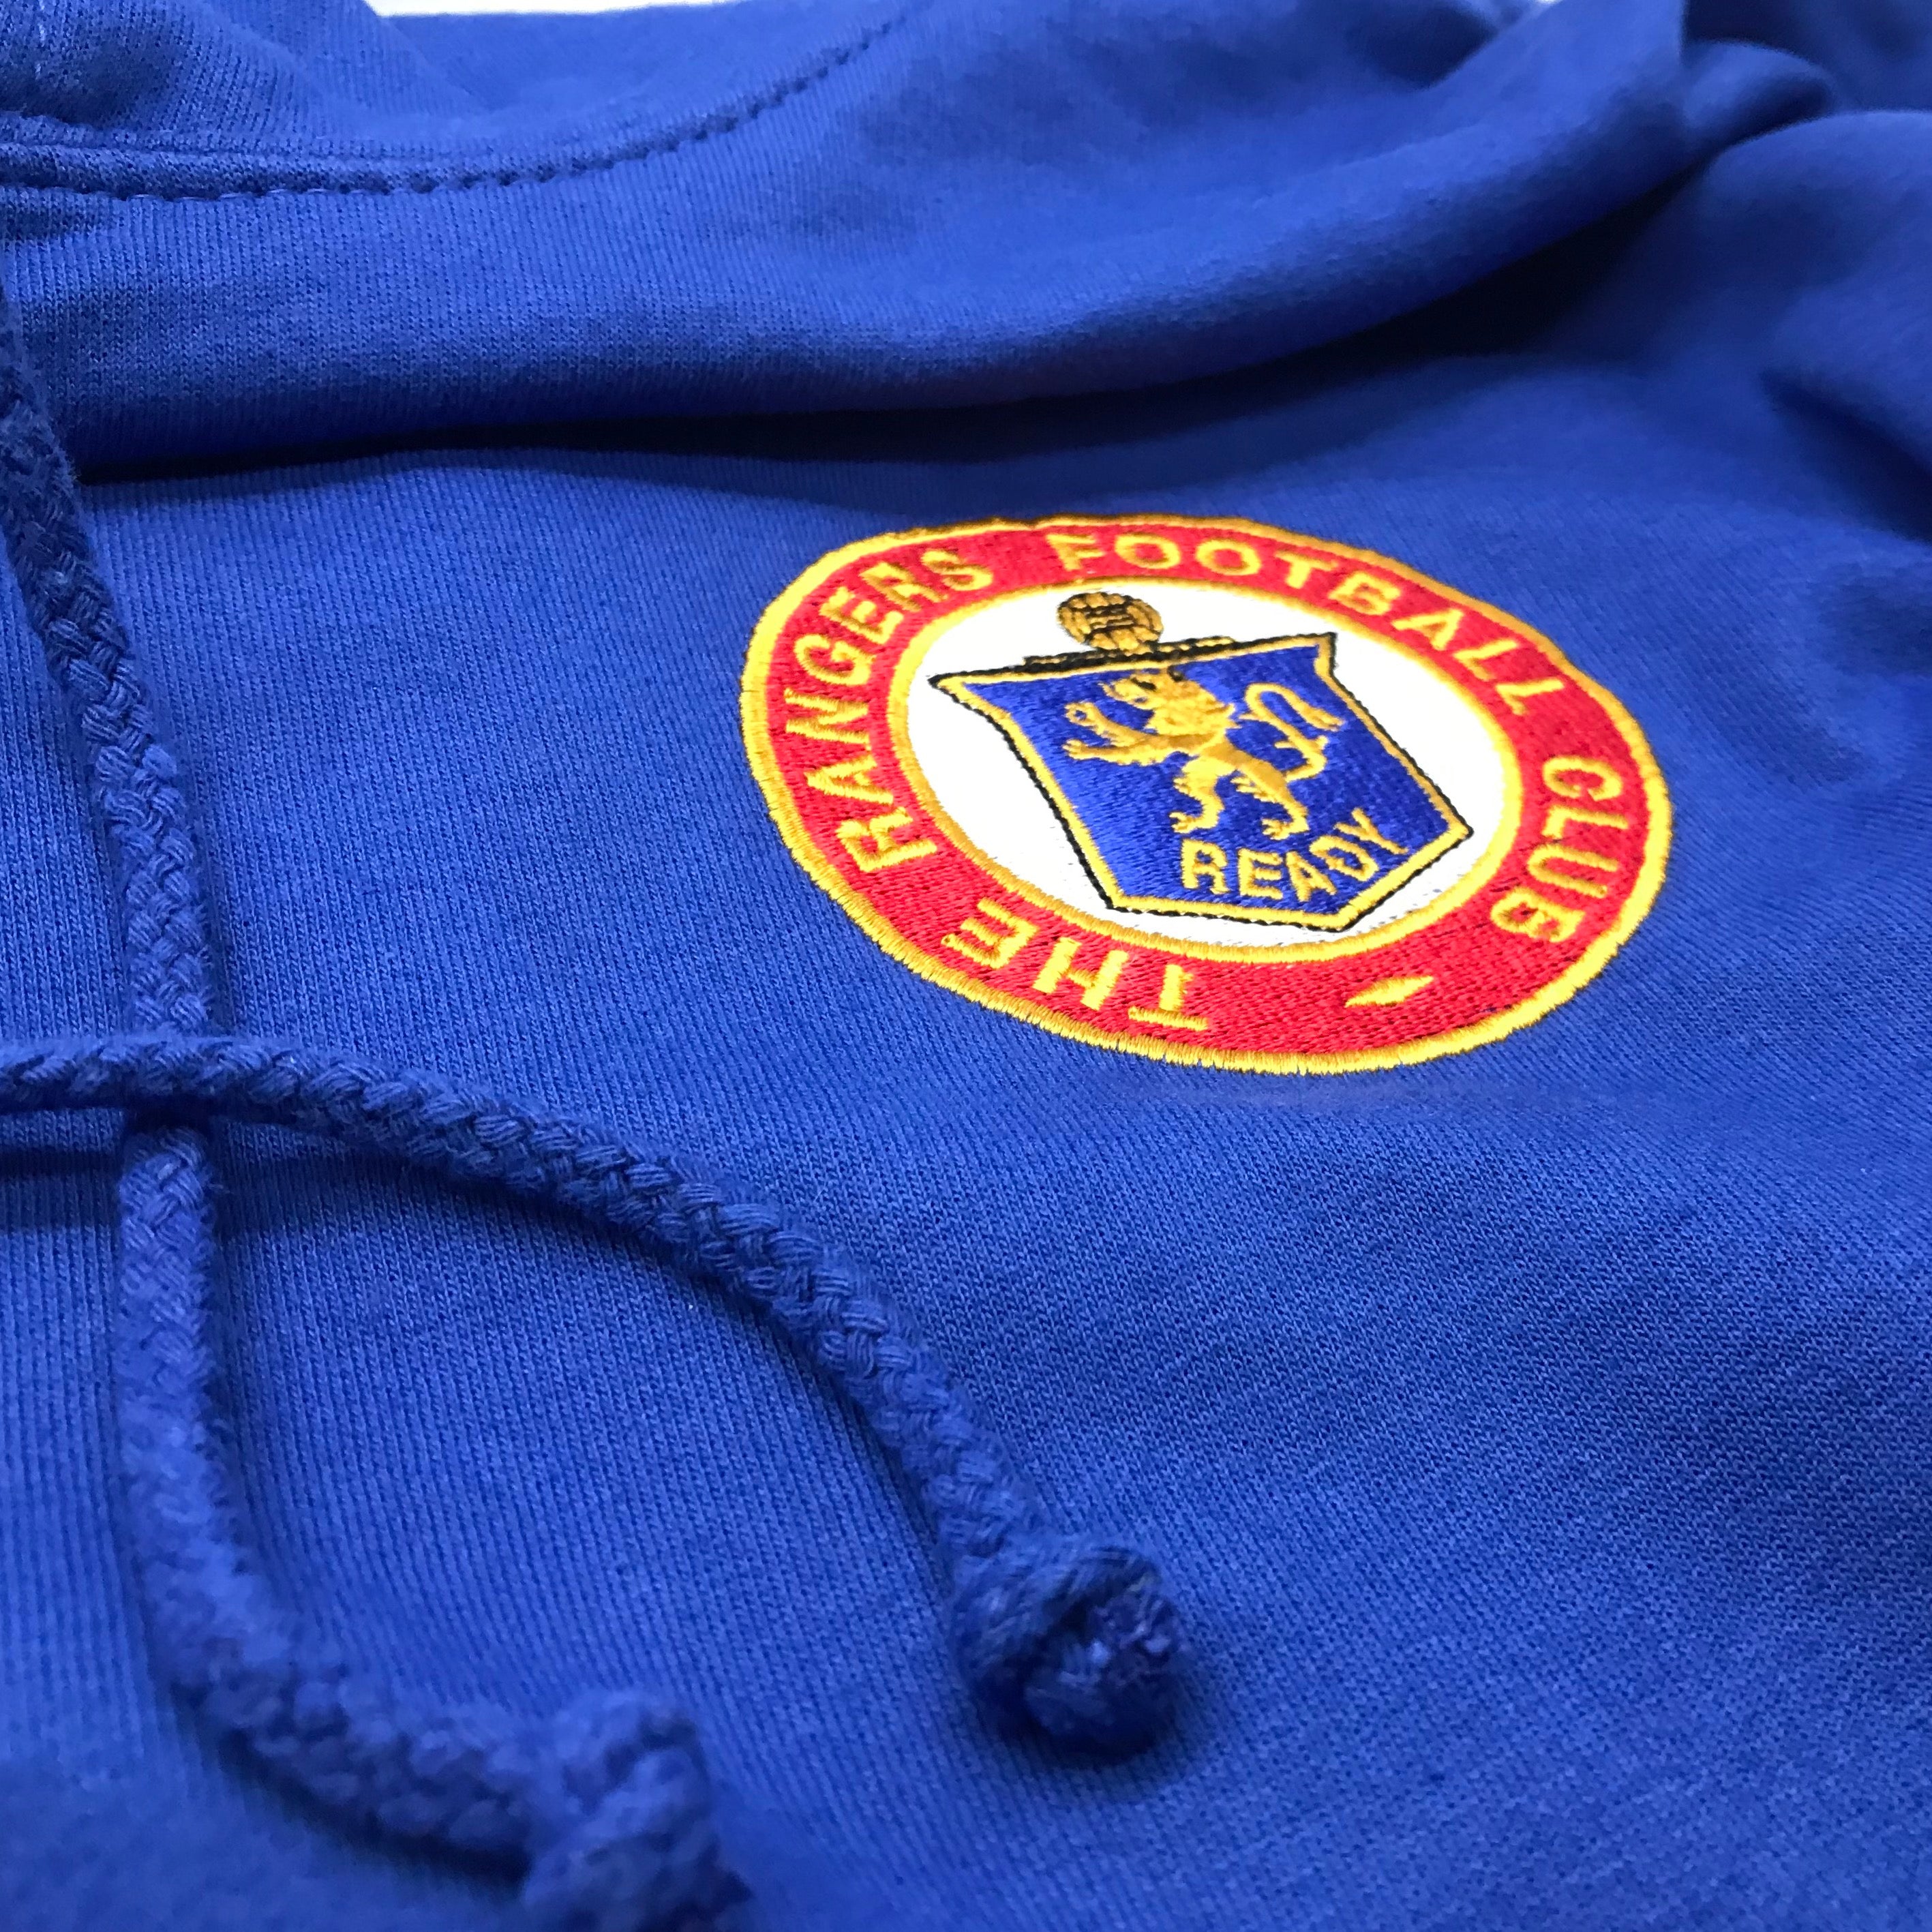 Rangers Football Hoodie | Embroidered 1959 Rangers Football Clothing ...